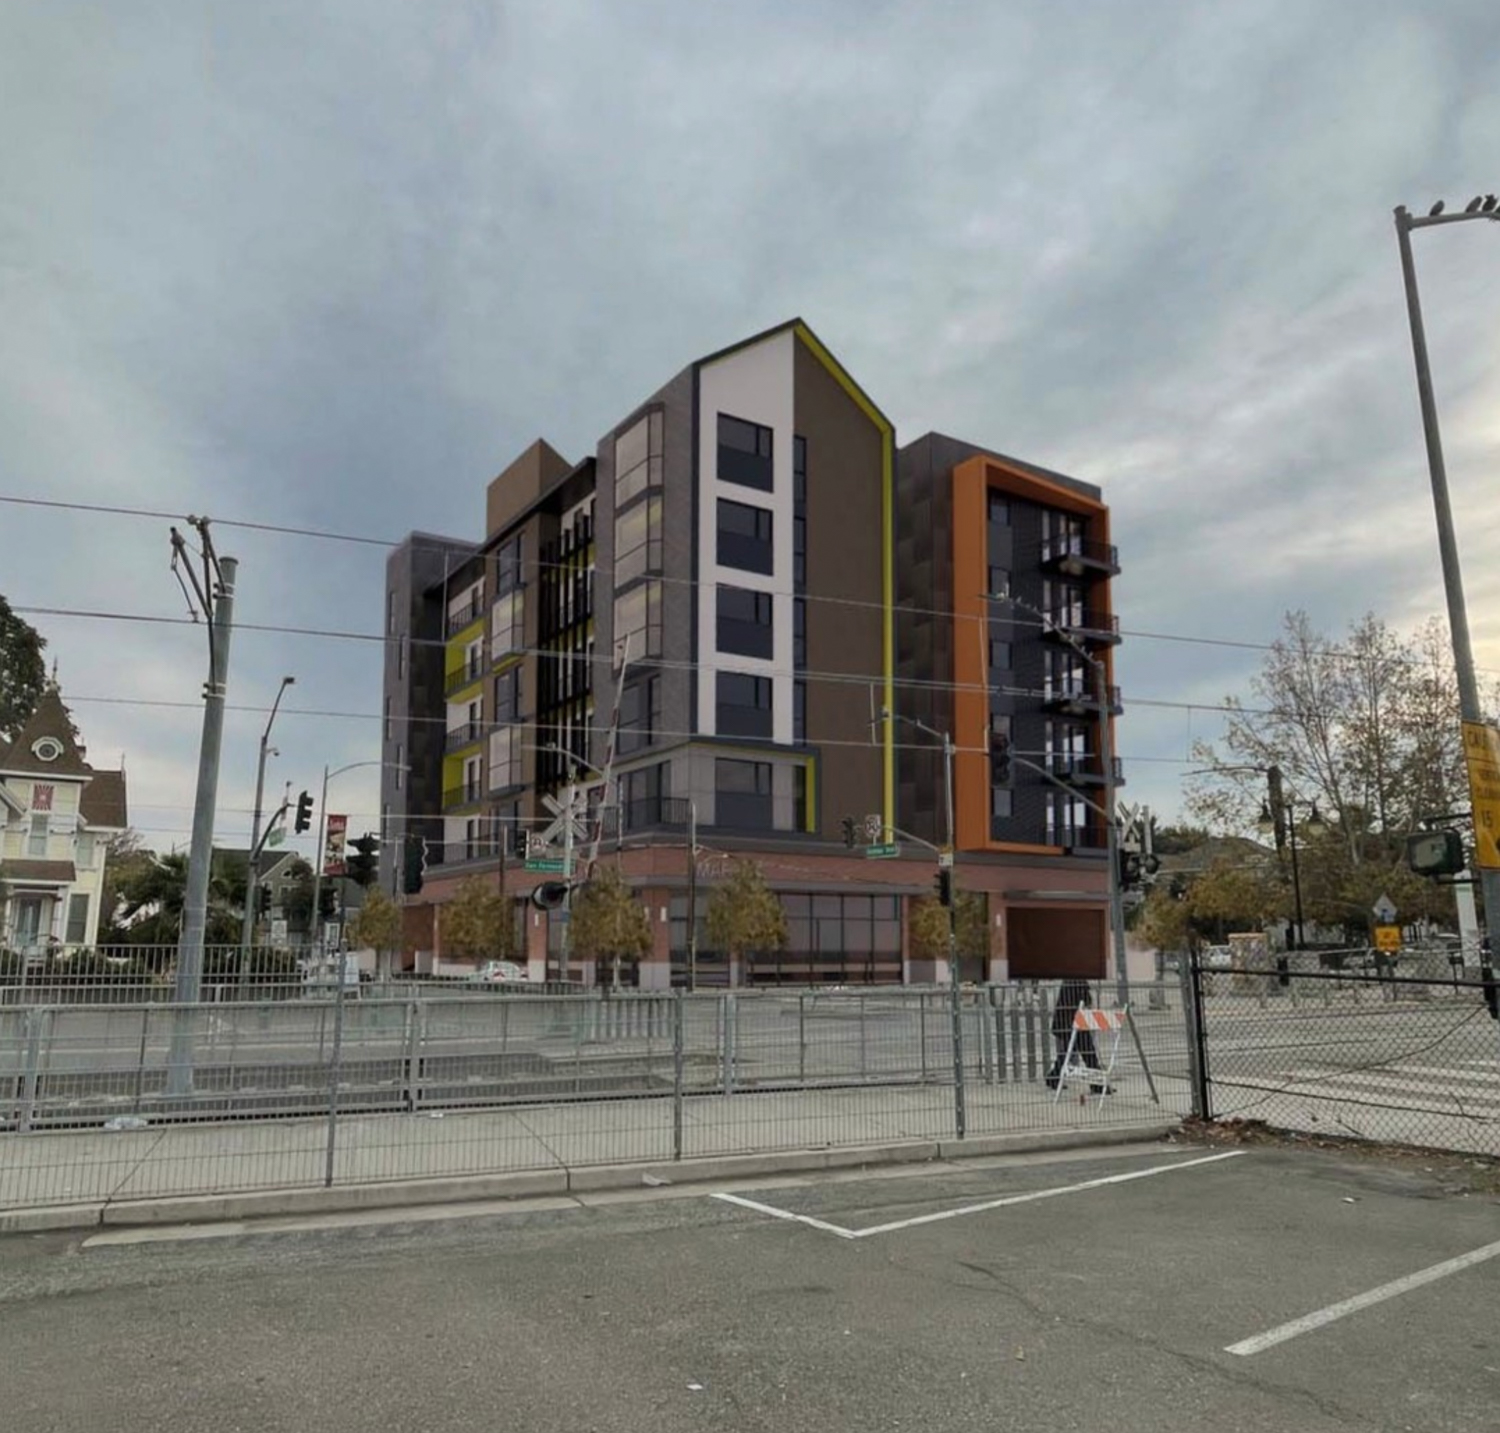 Initial plans for a six-story infill at 101 Delmas Avenue published in early 2022, rendering by MANU Studios